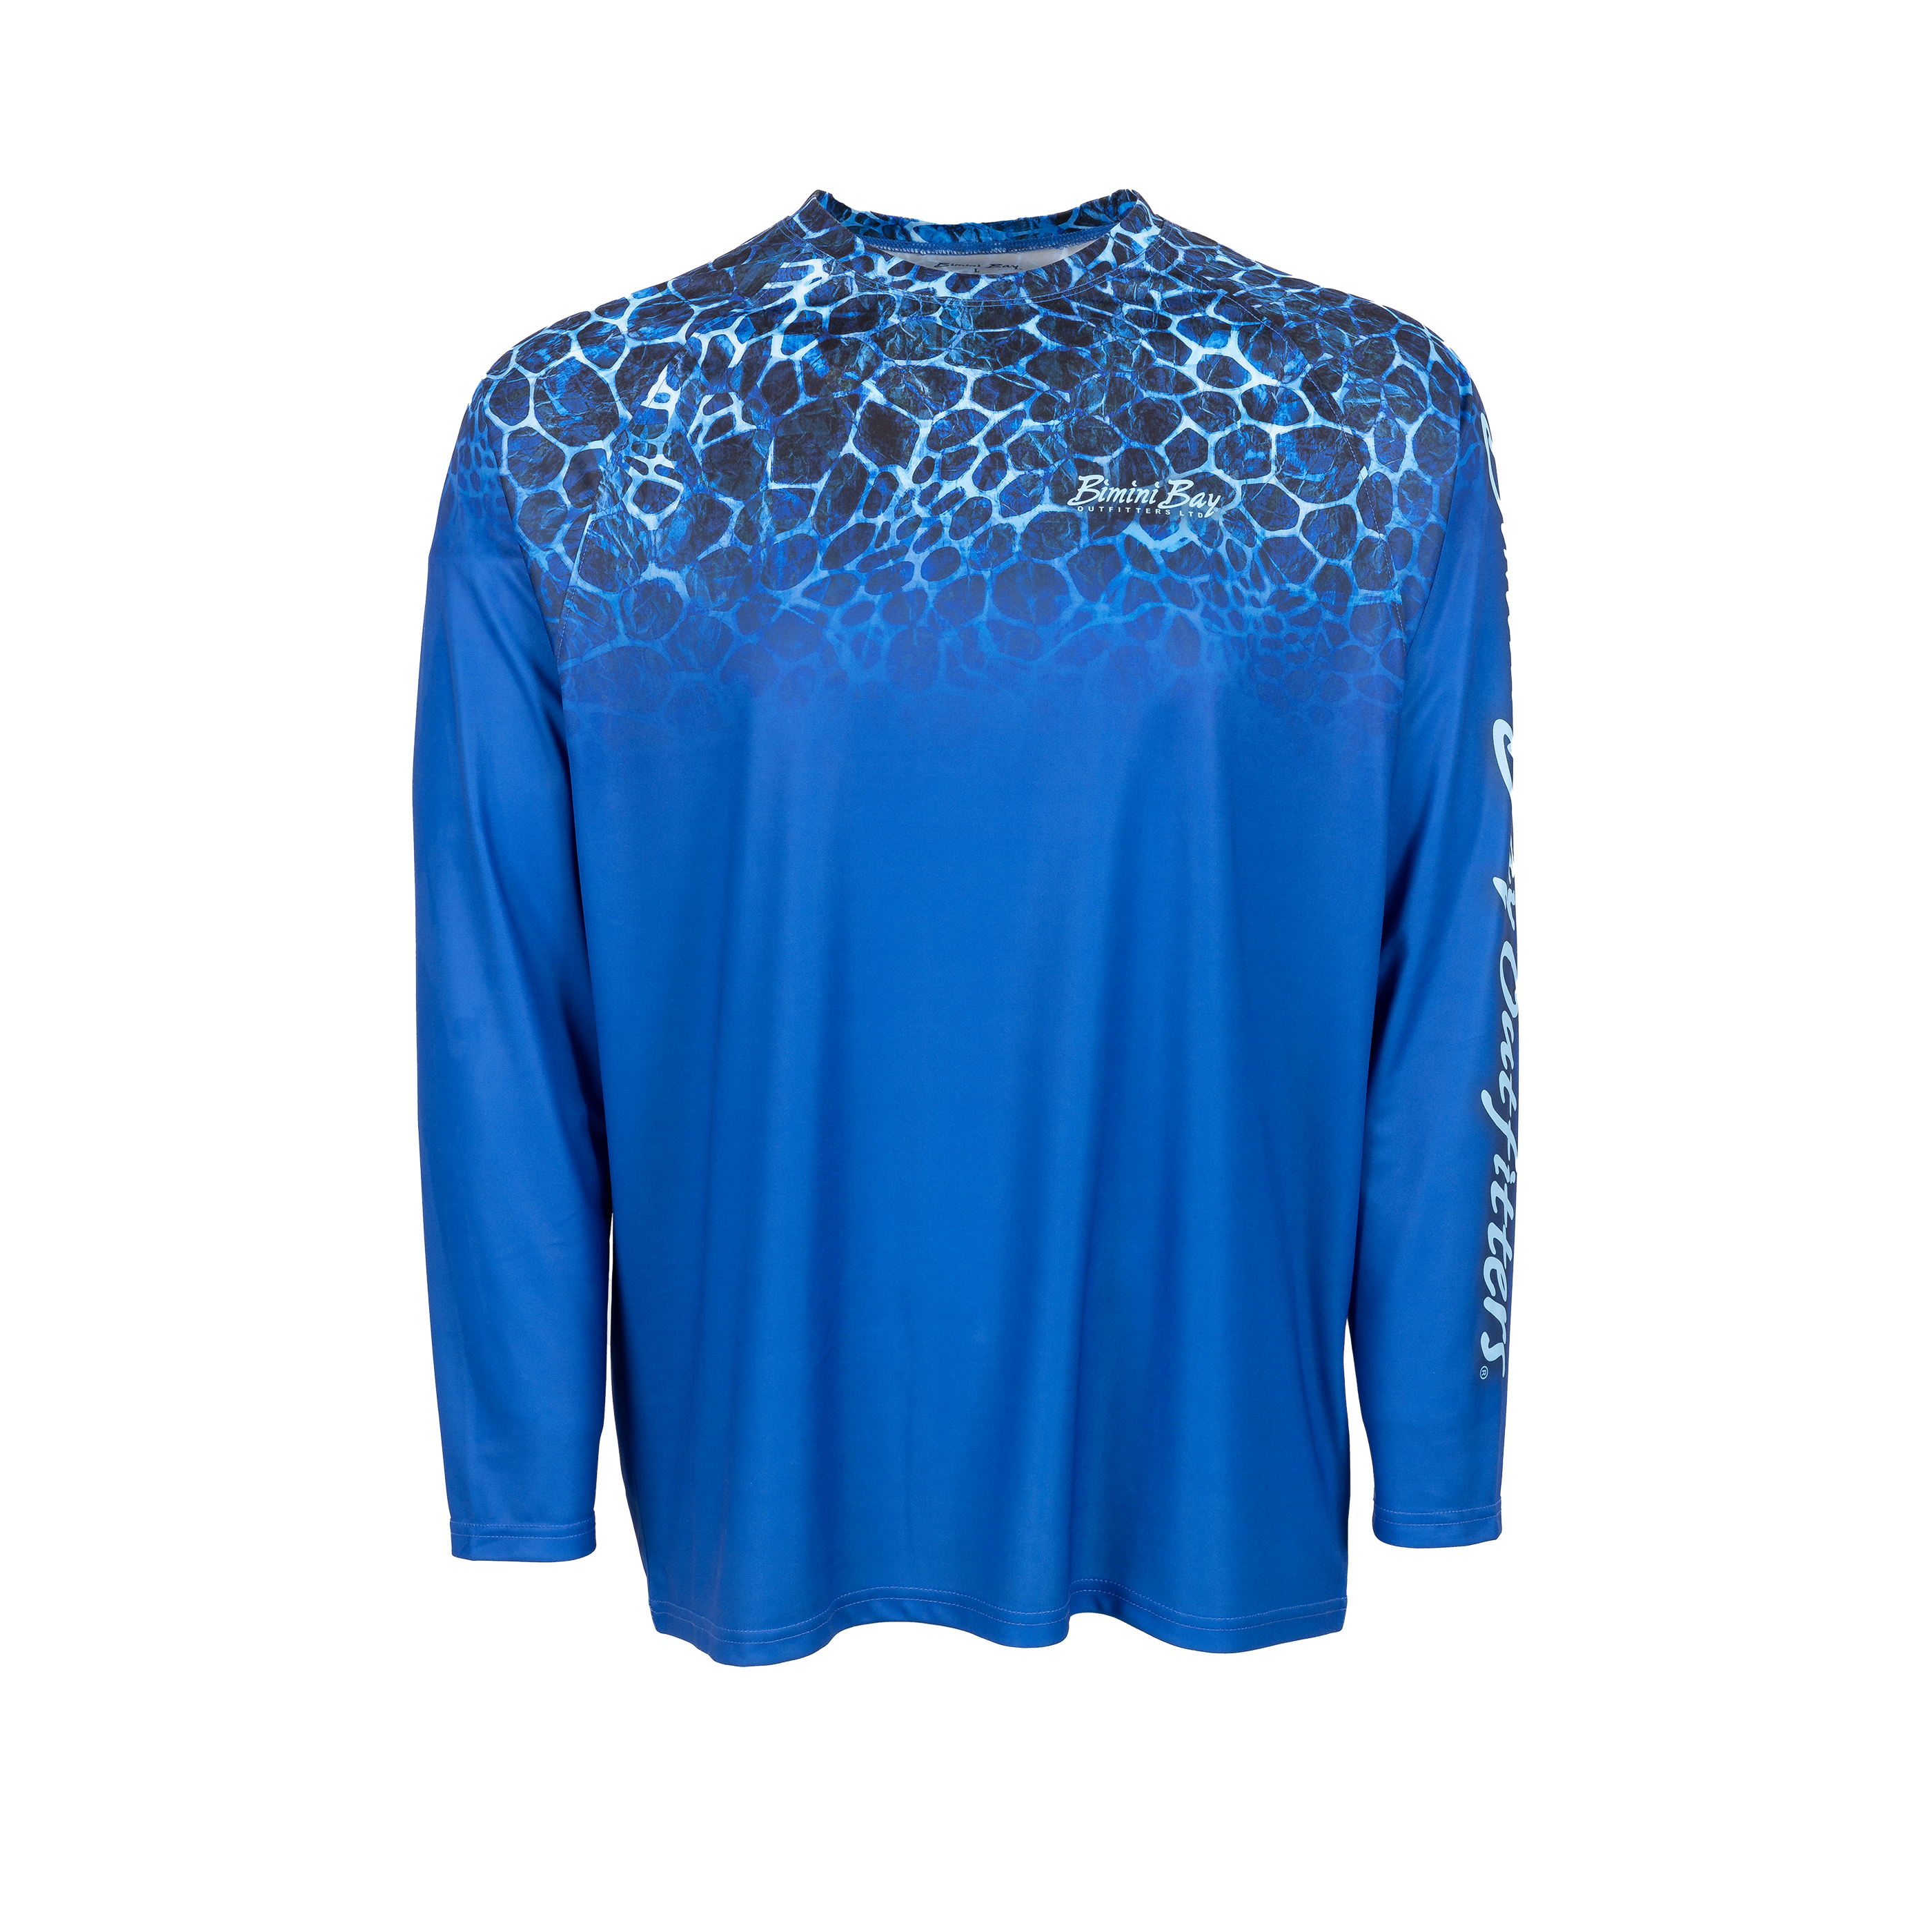 Bimini Bay Outfitters Octocoral Men's Performance Long Sleeve Tee